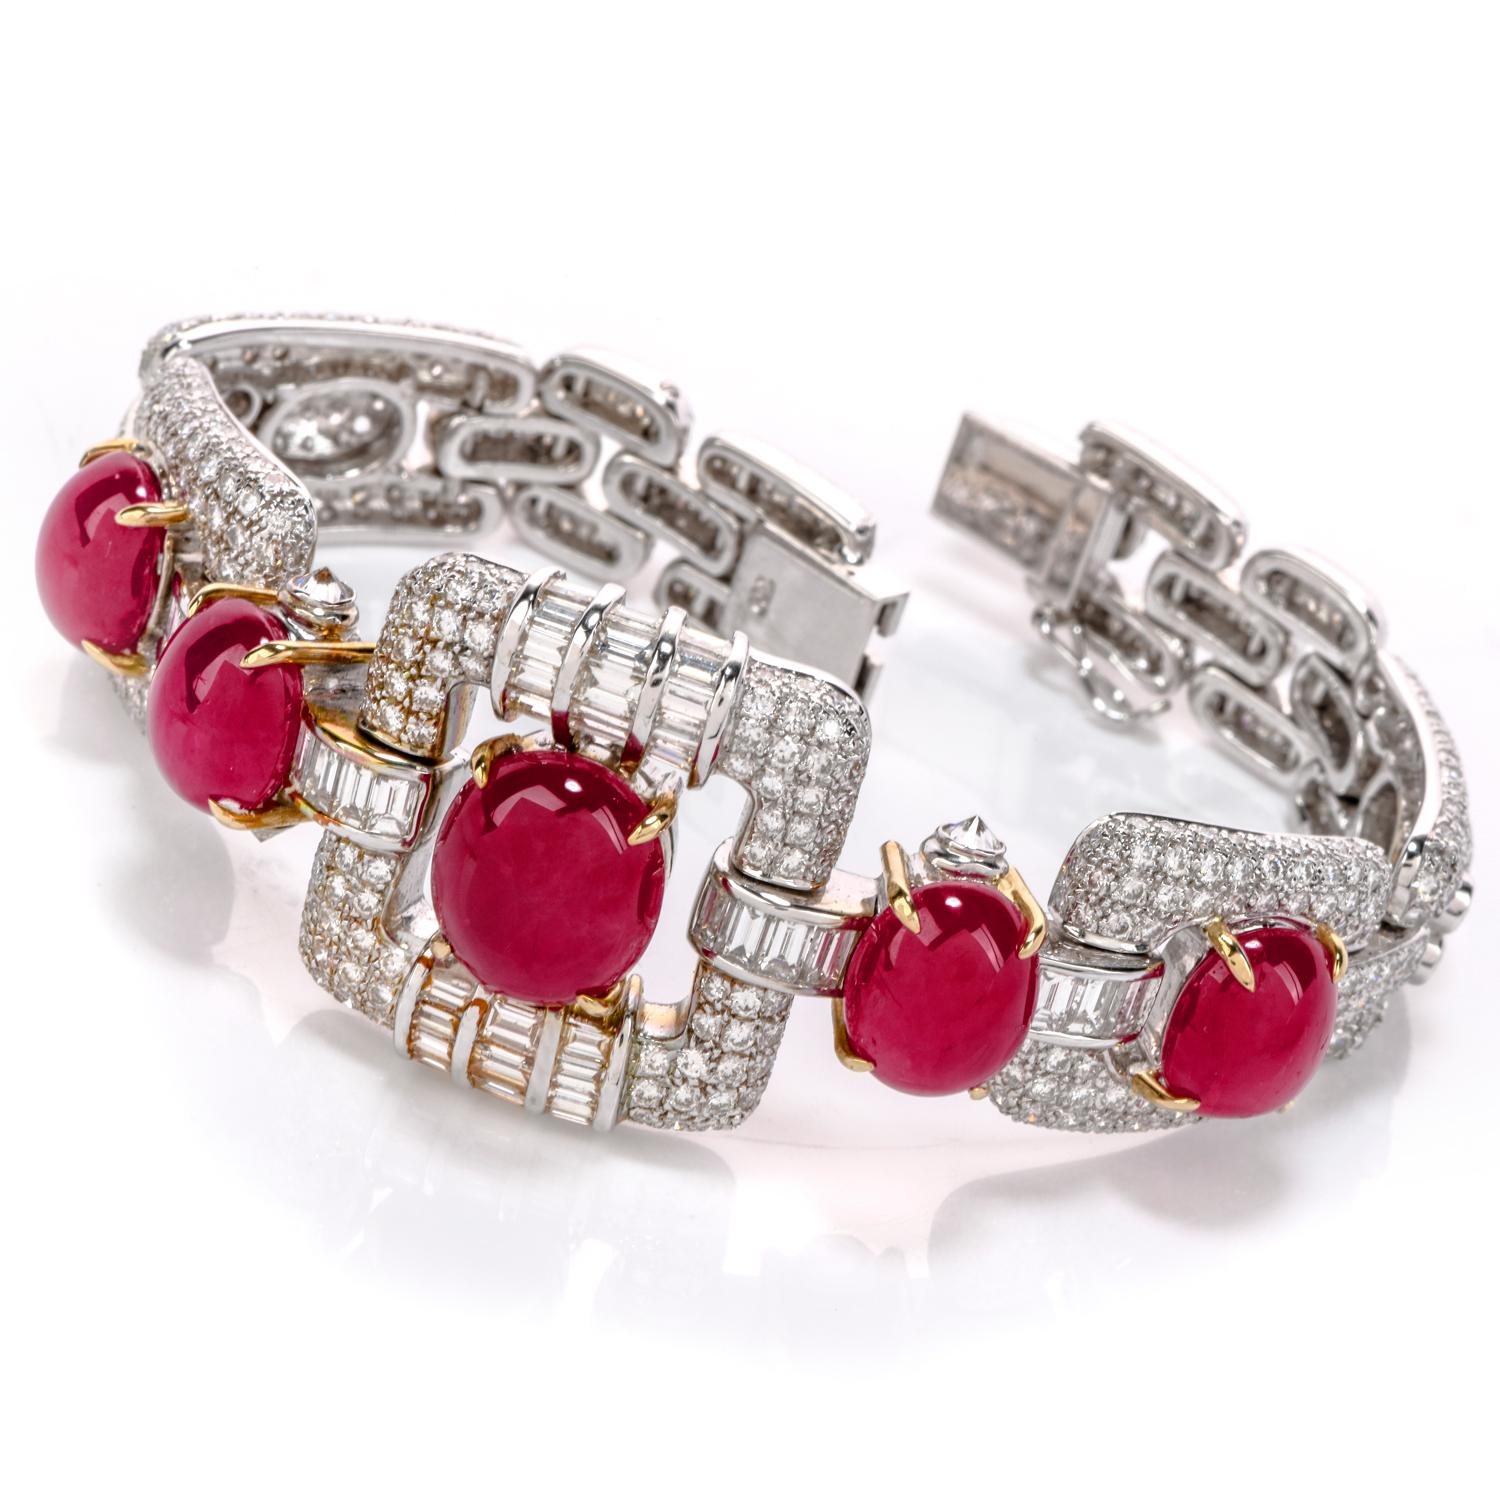 Completely adore the deep purplish red hue of this GIA Ruby Diamond 18K Gold Oval Cabochon Bracelet!  This bracelet is majestic and romantic, showcasing 5 translucent oval cabochons.  The rubies are encompassed with genuine round and baguette cut